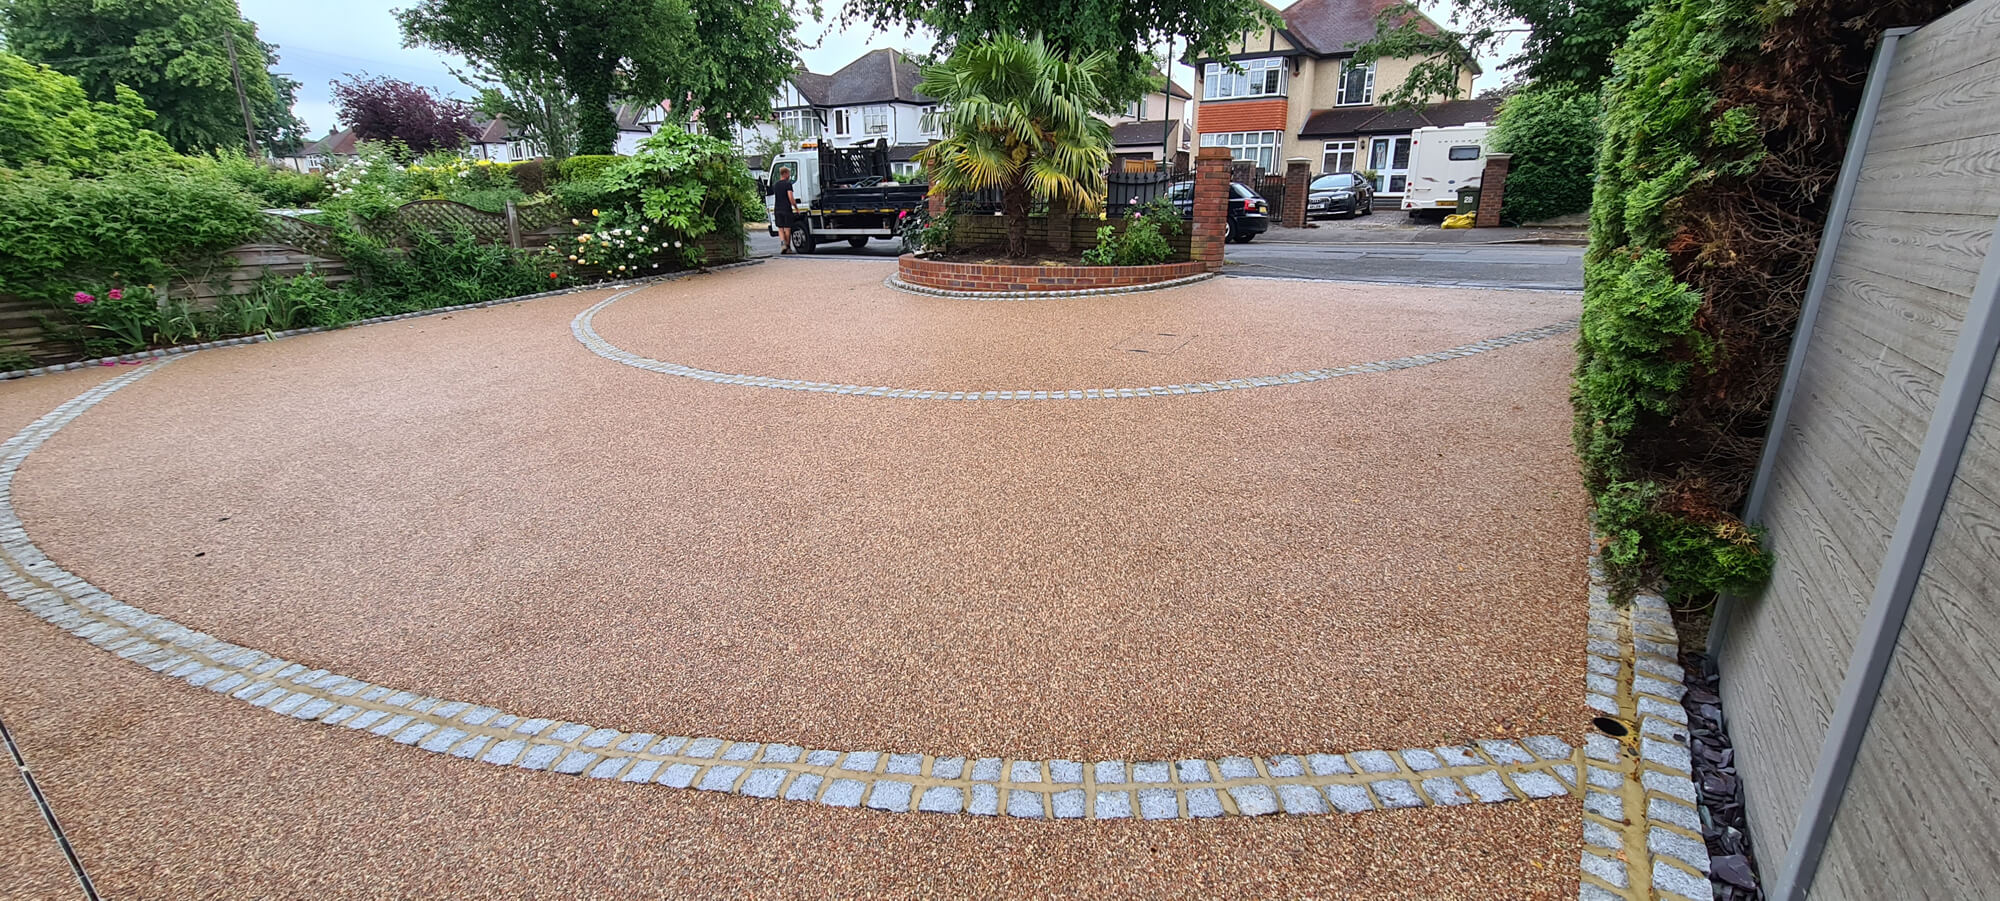 How to Build Resin Bonded Driveways: Ideas and Tips